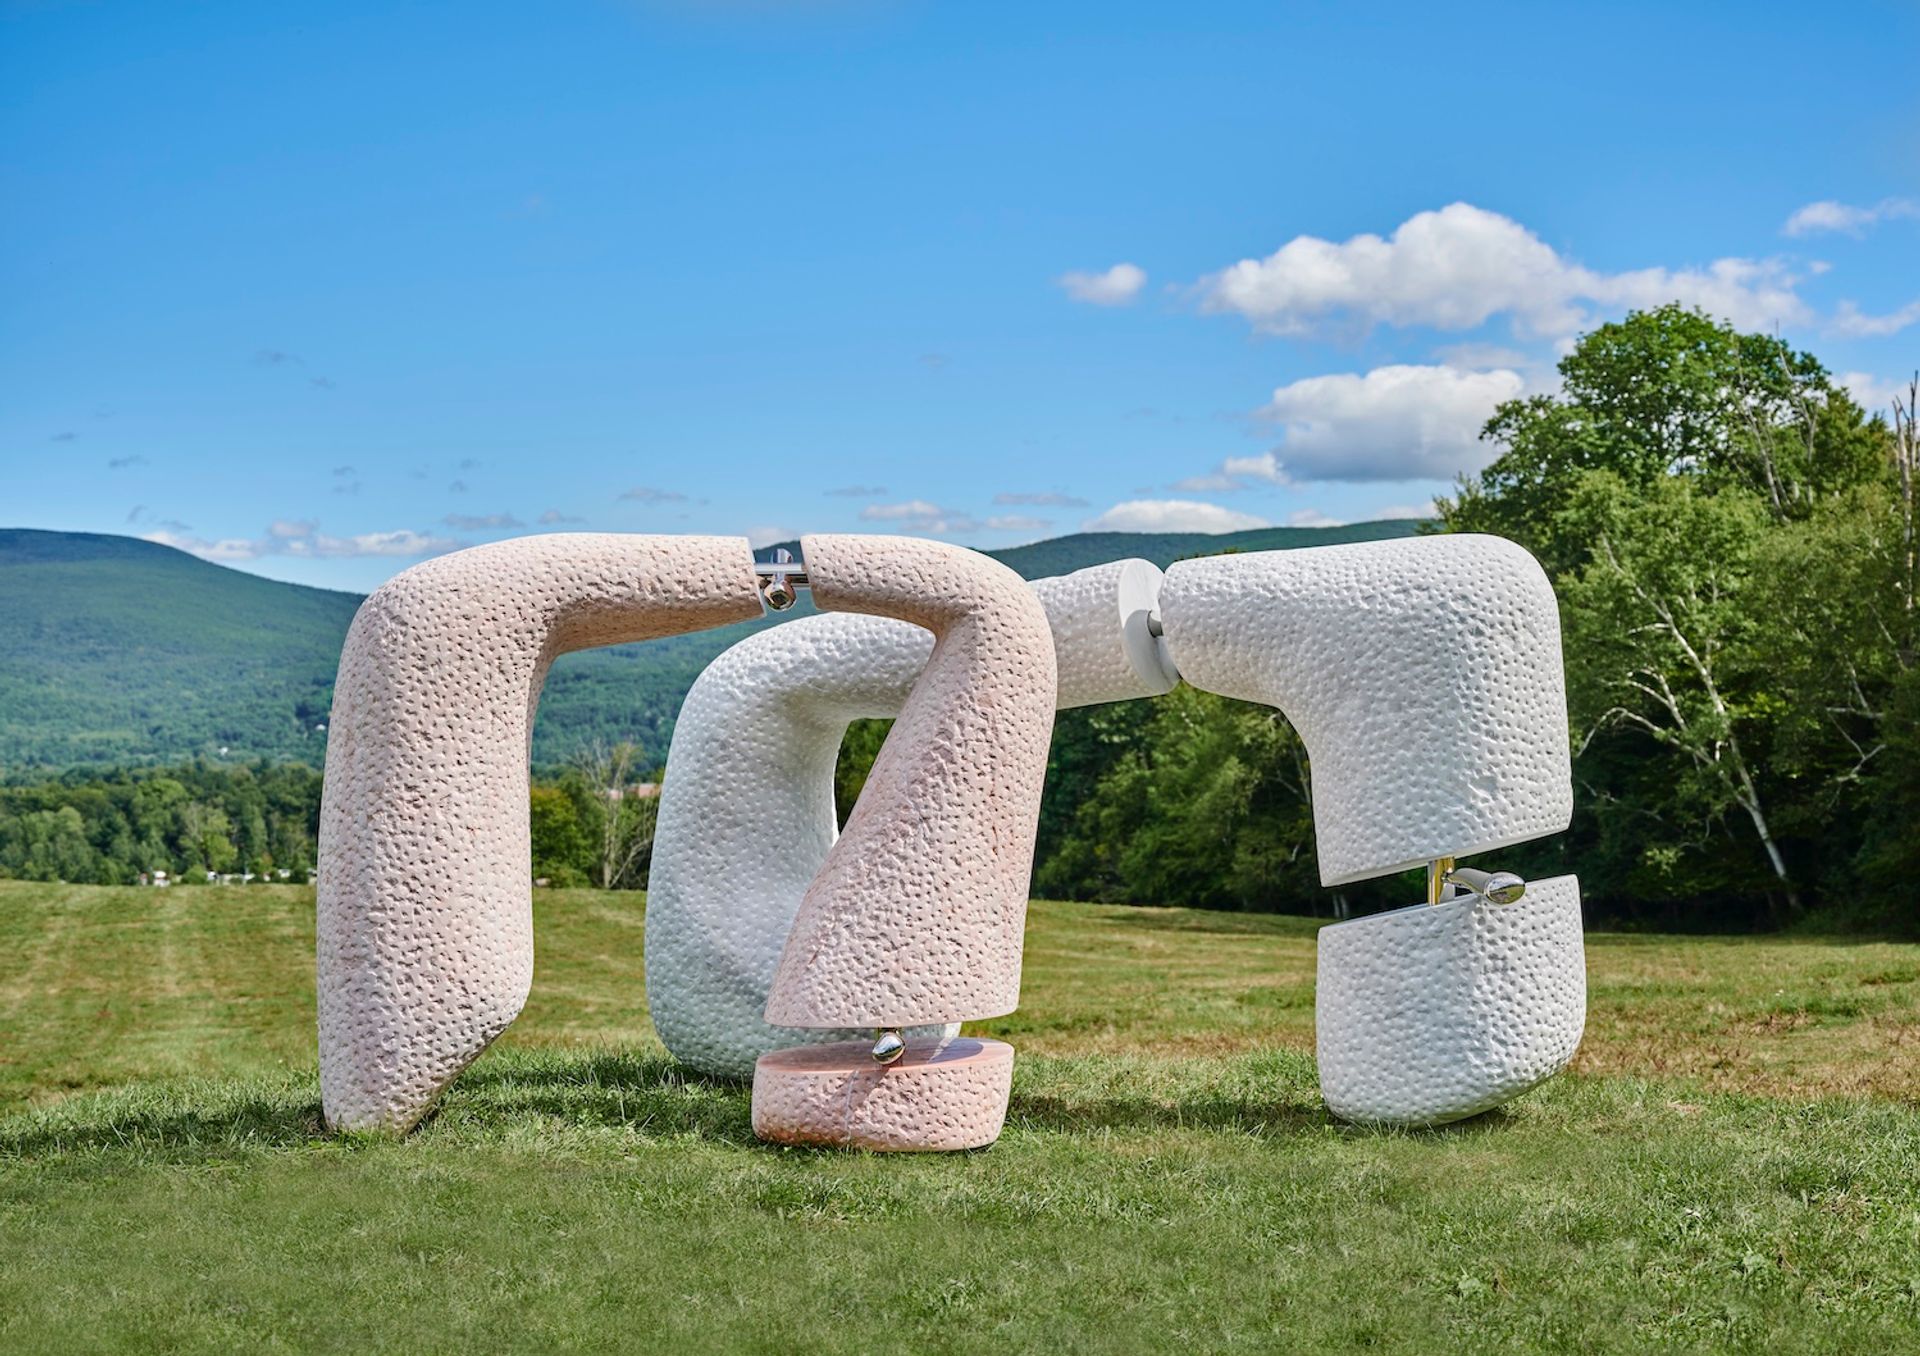 Nairy Baghramian, Knee and Elbow (2020) installed at The Clark Institute in the outdoor exhibition Ground/Work Photo: Thomas Clark; courtesy of the artist and Marian Goodman Gallery